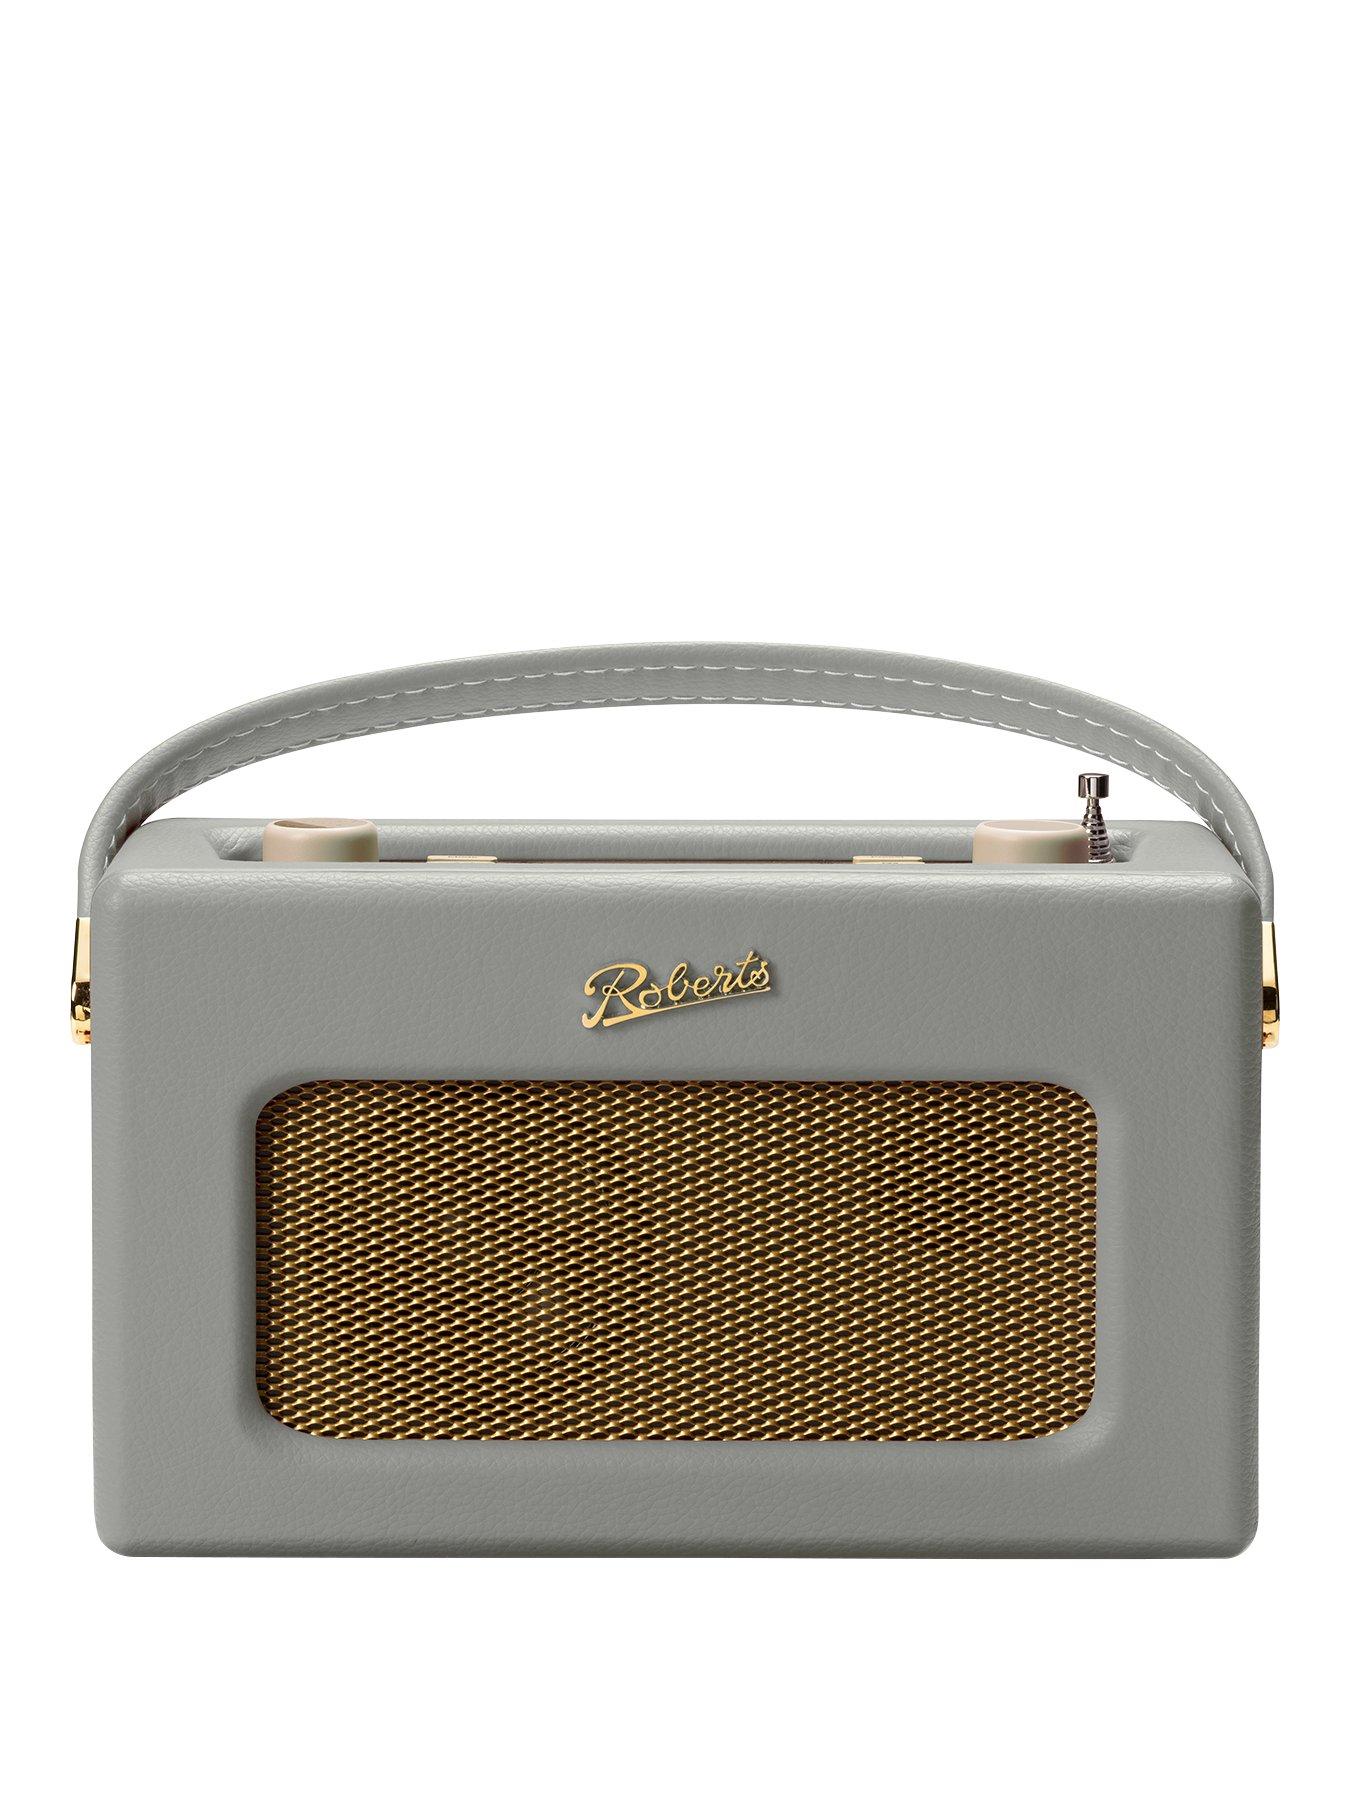 Roberts Revival Rd70 Digital Radio With Alarms And Bluetooth Streaming – Dove Grey